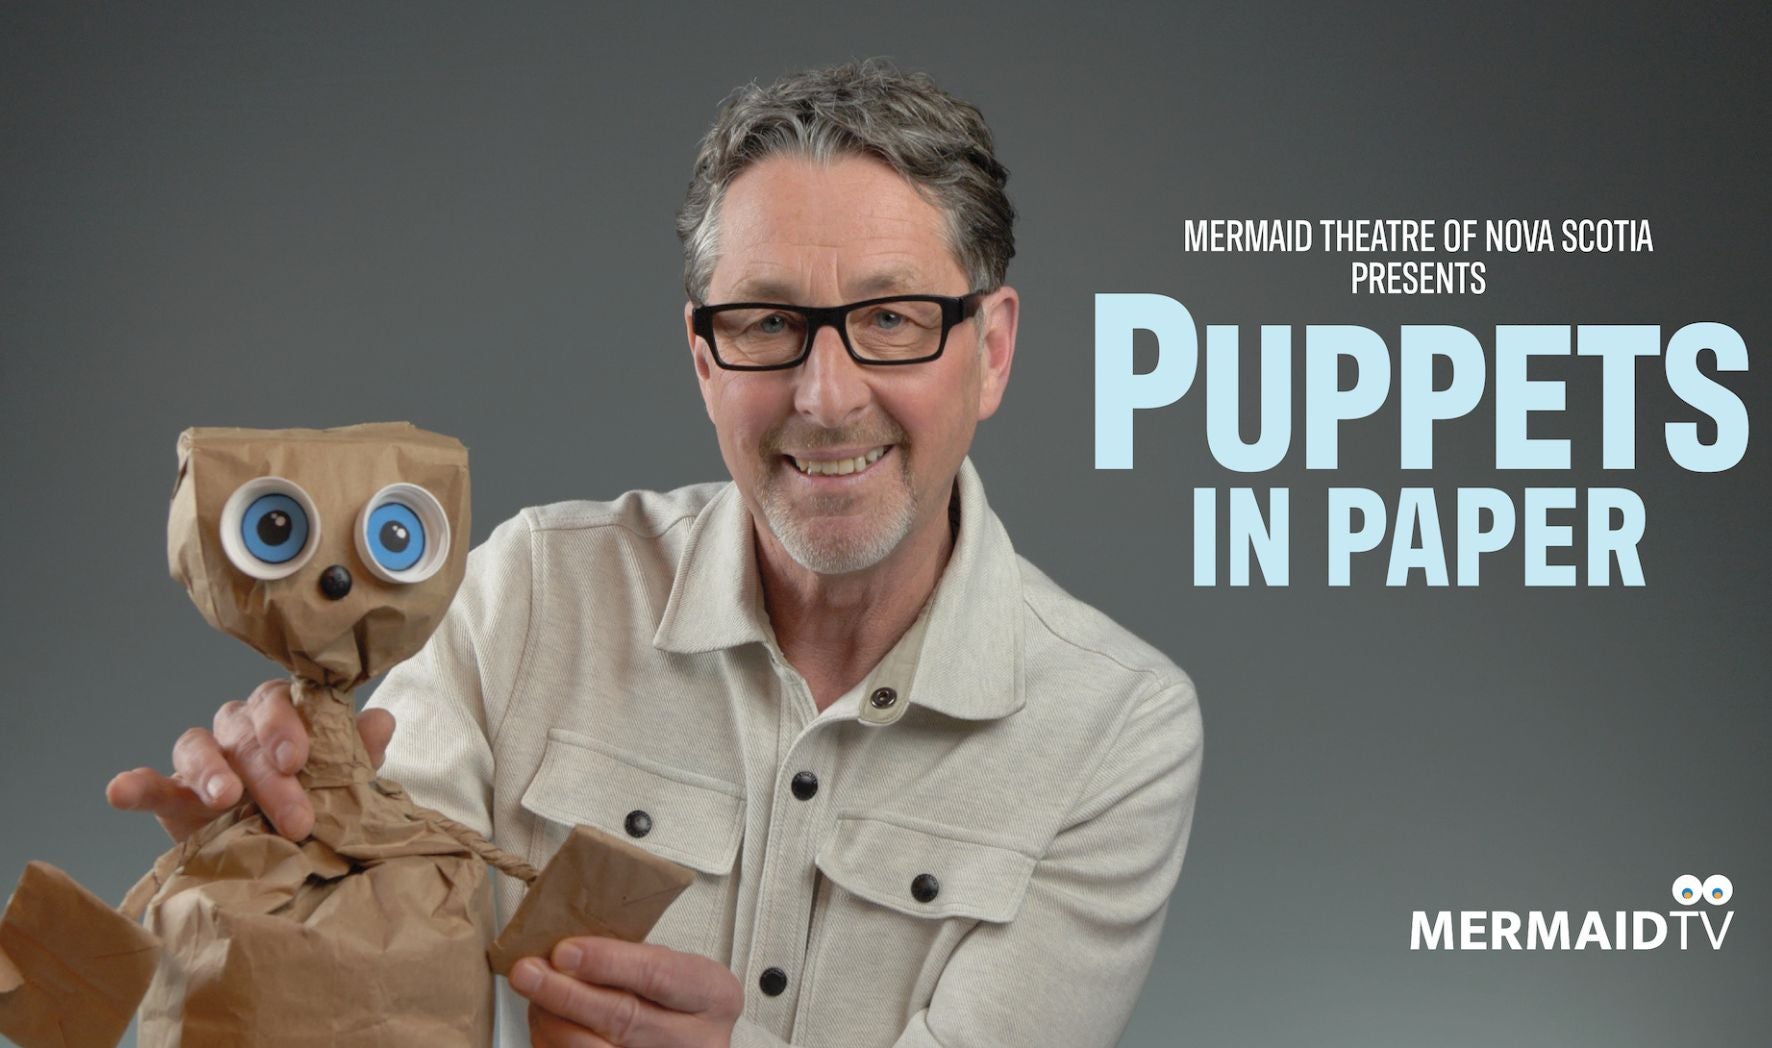 More Info for Mermaid Theatre of Nova Scotia's Puppets in Paper